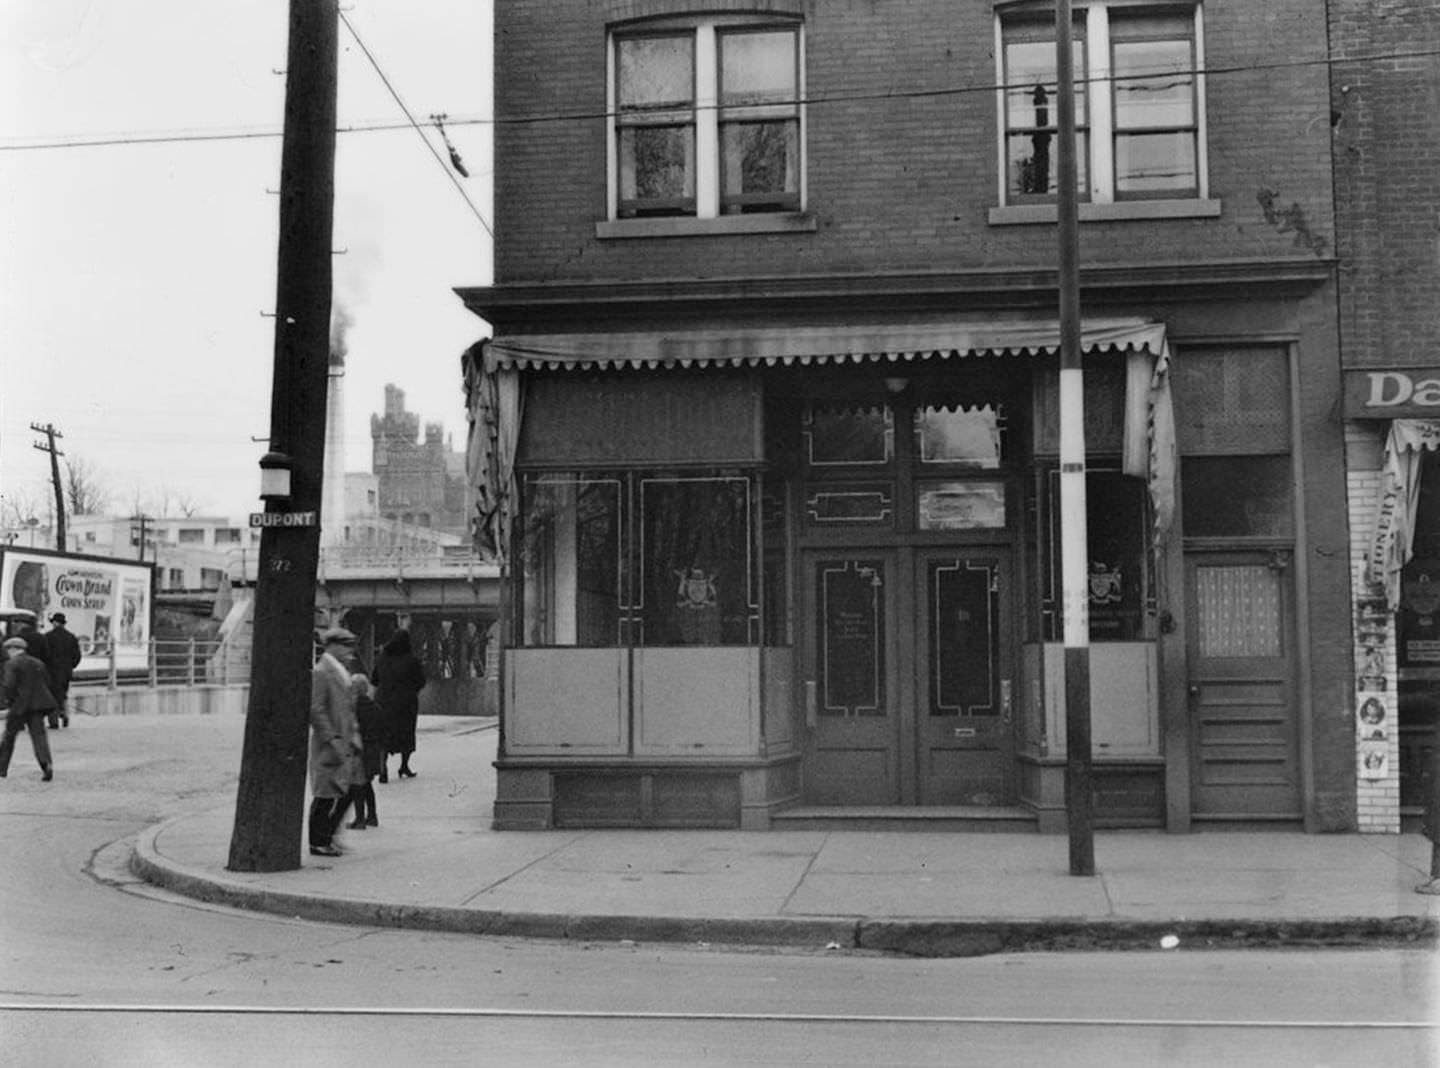 LCBO Liquor store, northeast corner of Dupont St. and Spadina Rd., March 18, 1930.